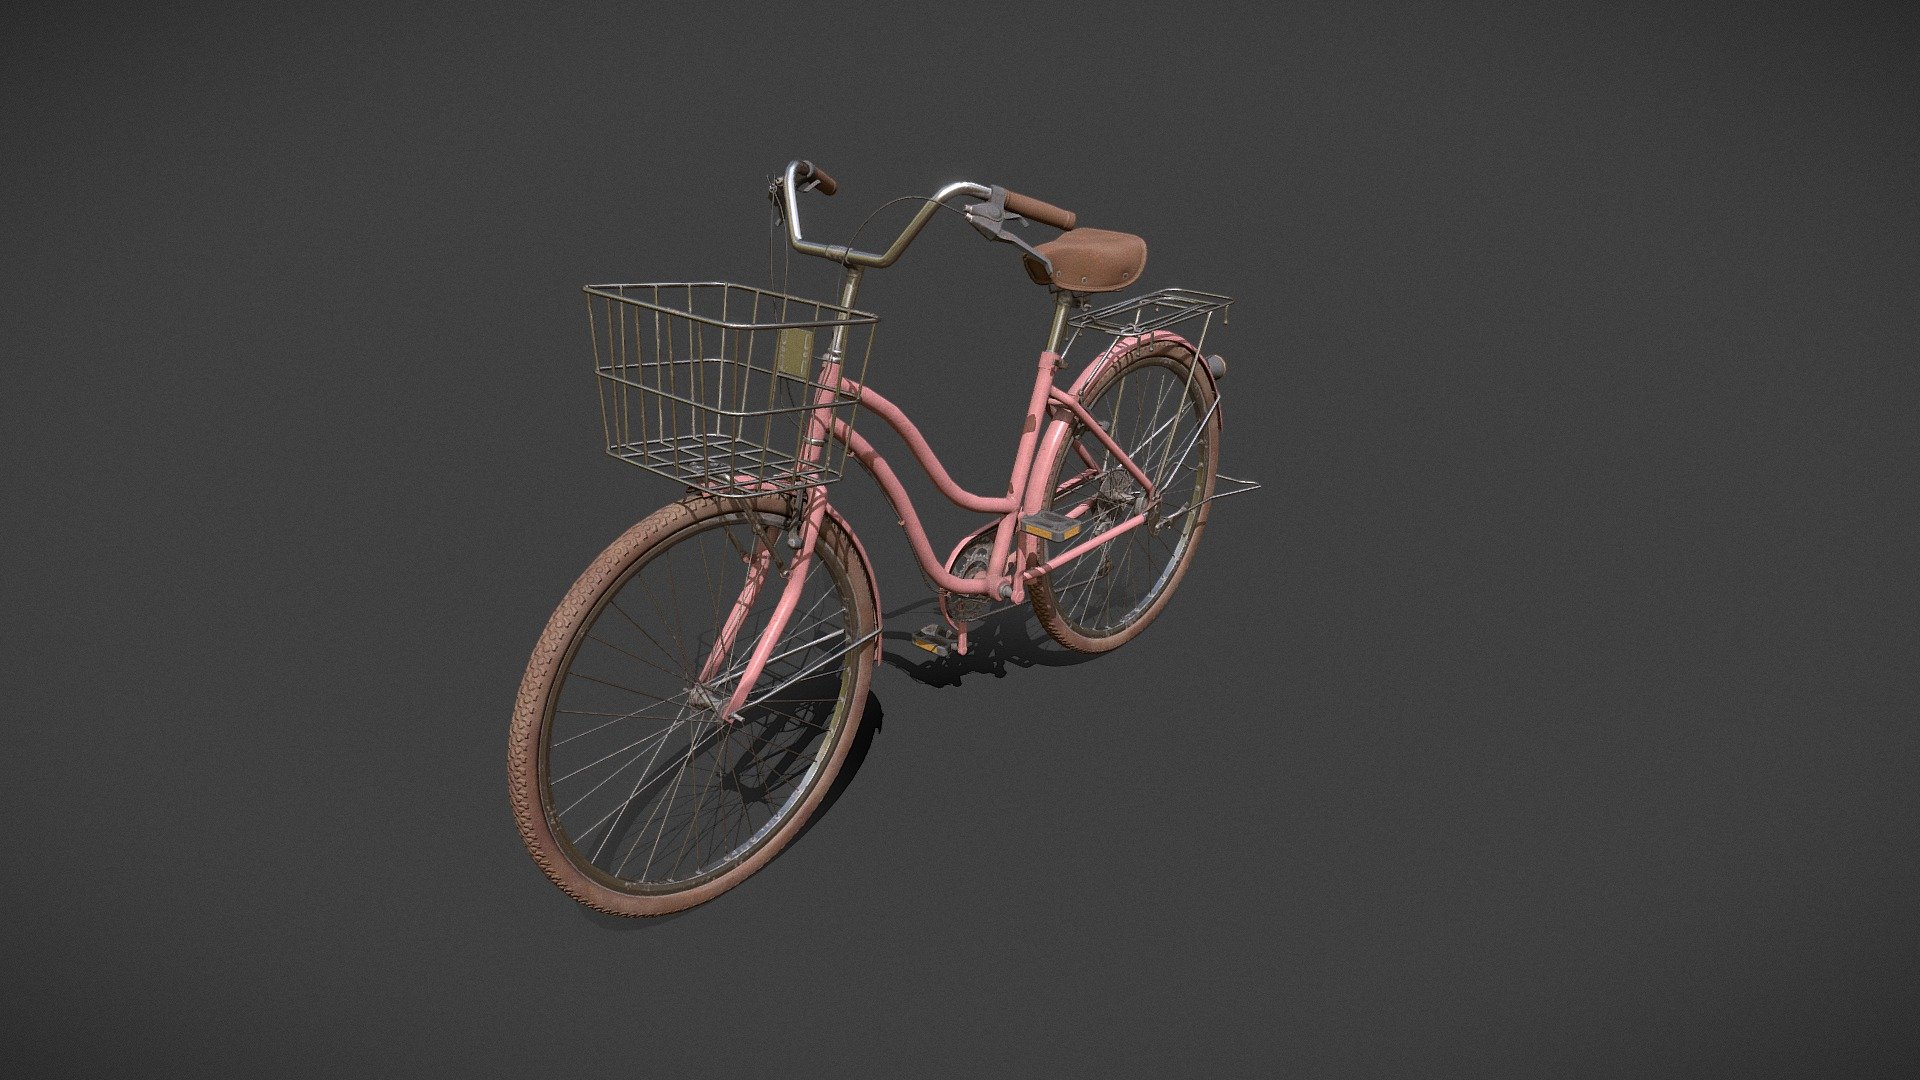 Classic Pink Bicycle

Total Polygon Count : 23k Total Vertex Count : 12k LOD: No

Texture : Baked, No overlap
TextureSet : BaseColor, Normal(DX), OcclusionRoughnessMetallic(ORM Packed)
TextureSize : 4096*4096px 
Total Textures Count : 03 ((T_Bicycle_BaseColor, T_Bicycle_Normal, T_Bicycle_ORM)) 
Total Material Count : 01 ((M_Bycicle)) 
Total UV Count : 01 ((No LightMap))

Rigging : Rigged 
Animation : No Animation

Suitable for game prop 
License Free 

Used Programs : C4D, Zbrush, SubstancePainter, MamosetToolBag 
Include high, low, cage files
Suitable for game prop
Include Baked Textures (( ID, AO, Curve, Normal, NormalObj, Position ))
License Free

Producer : Joygon2323 
Artstation : https://www.artstation.com/joygon2323 - Classic Pink Bicycle - Buy Royalty Free 3D model by joygon2323 3d model